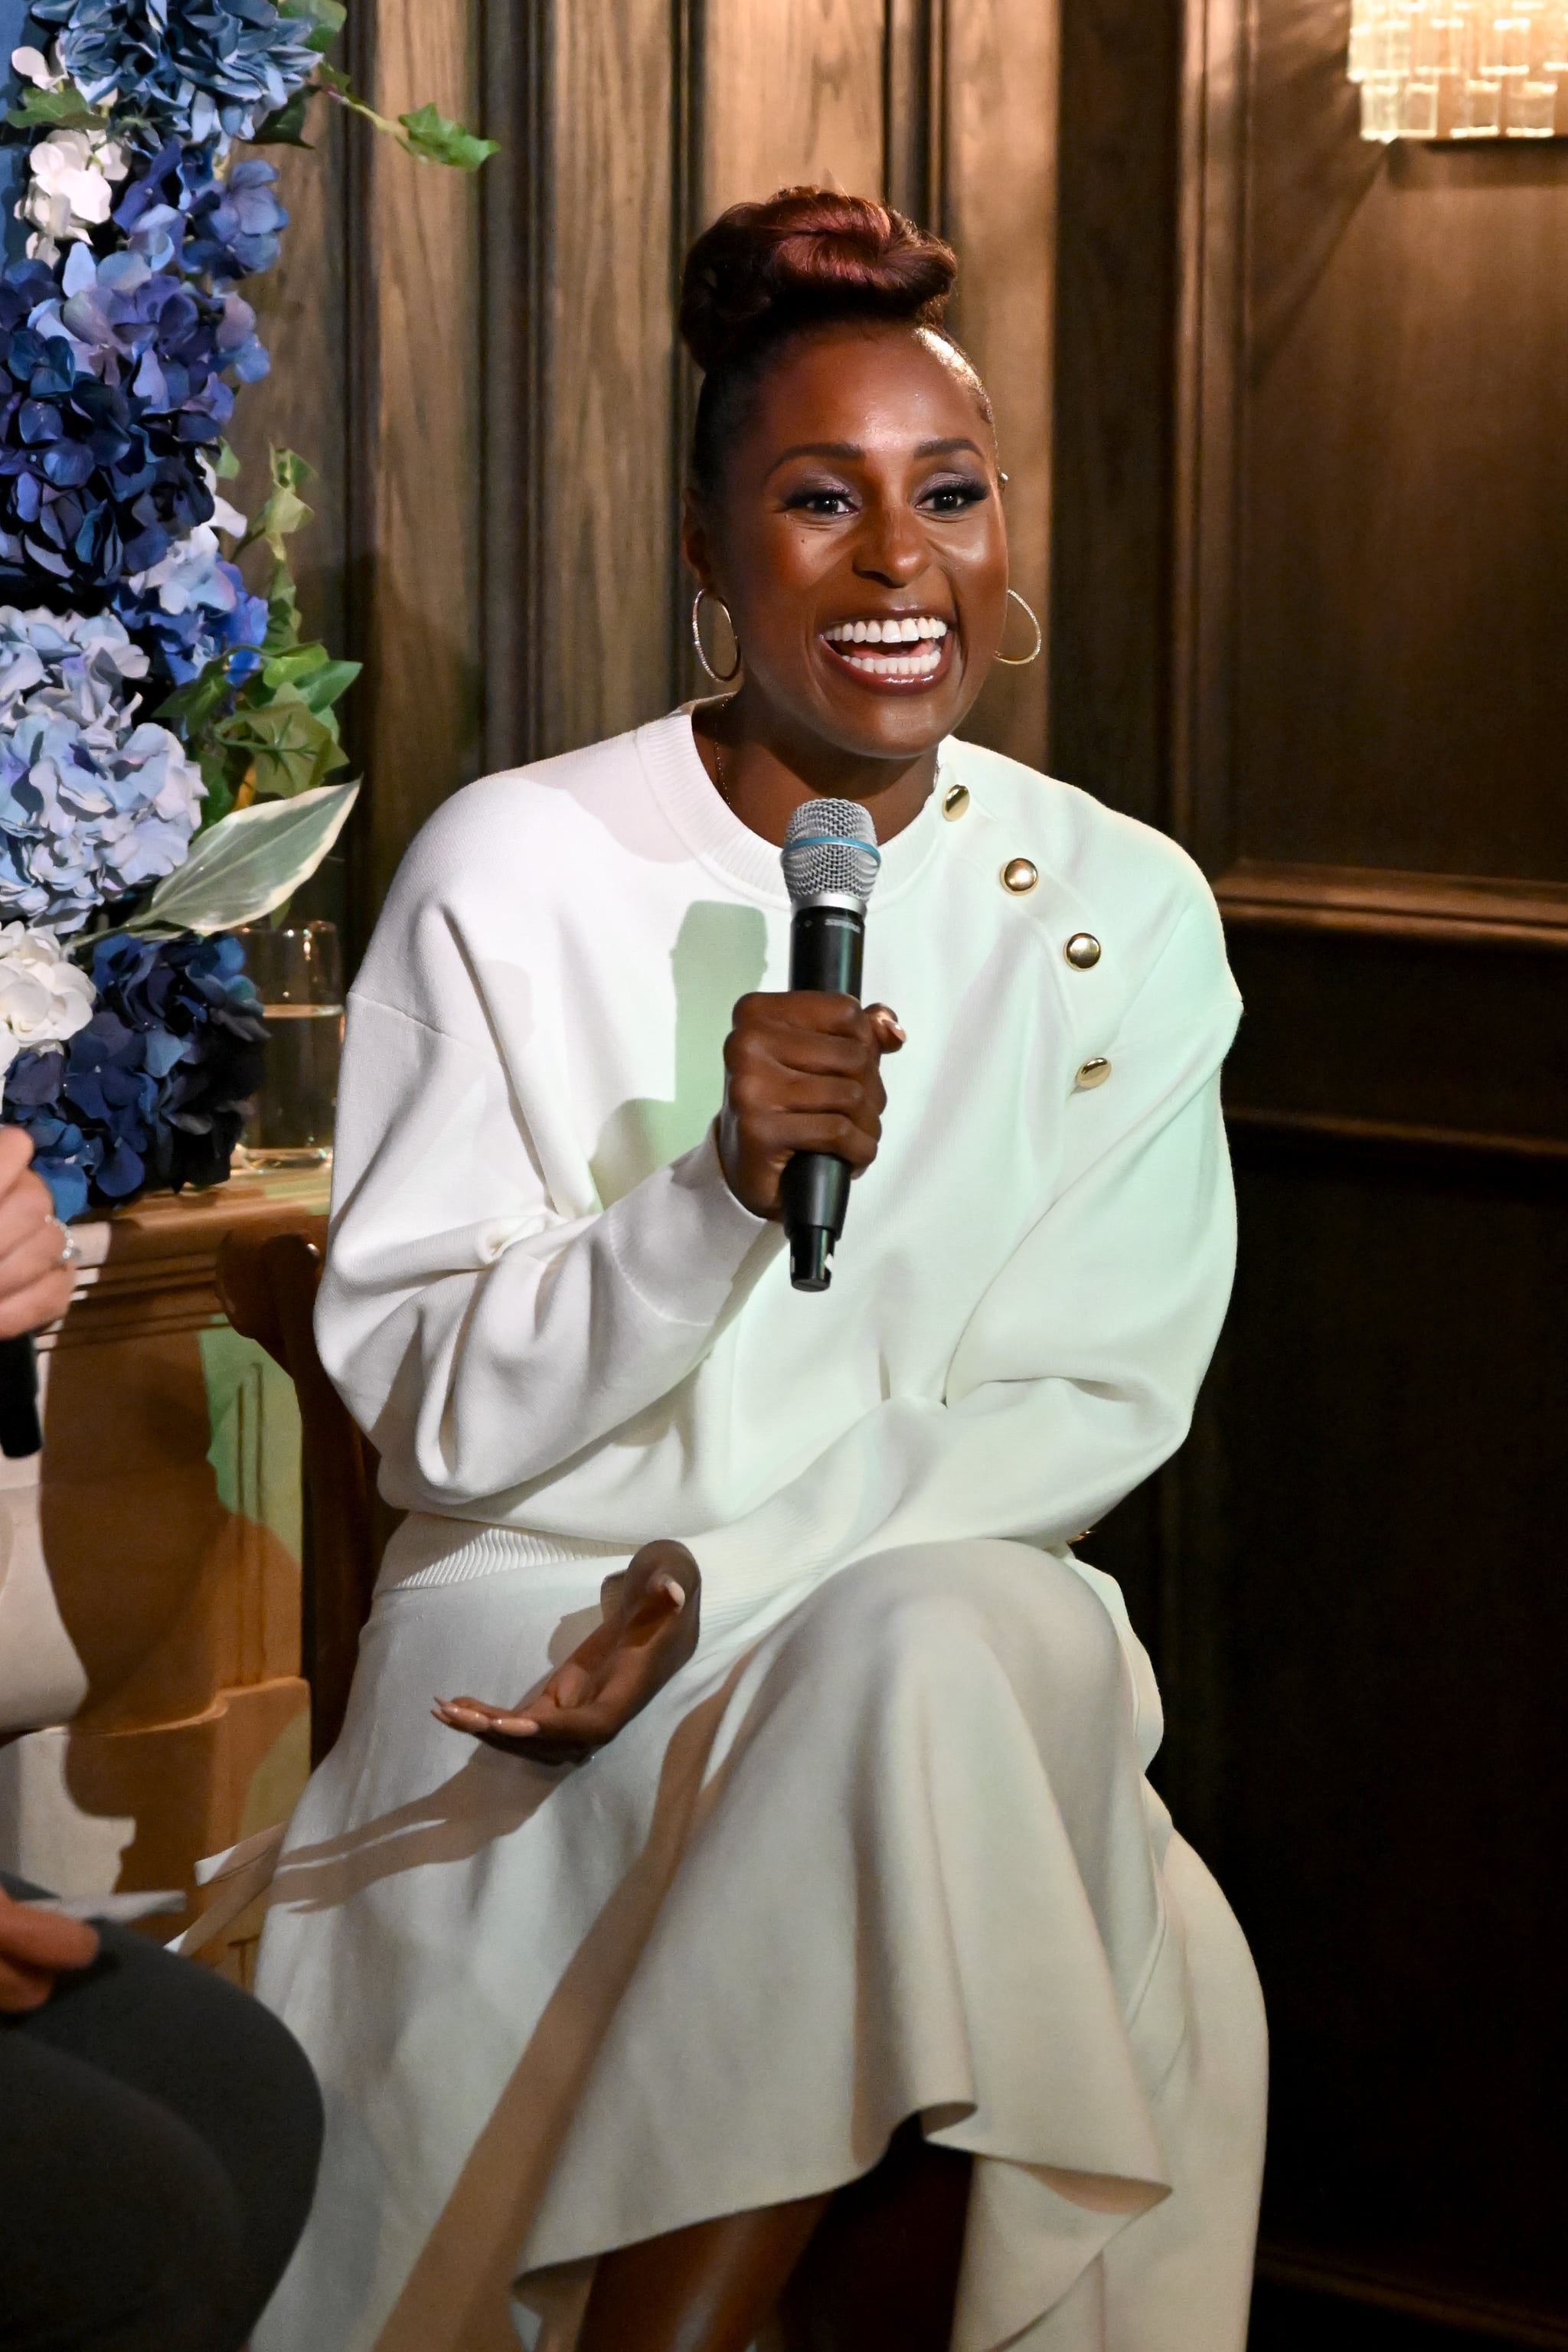 NEW YORK, NEW YORK - NOVEMBER 01: Actress, producer and passionate traveler, Issa Rae leads a fireside chat during AmericanExpress Travel's 2023 Trending Destinations event at The Beekman Hotel in New York City. (Photo by Bryan Bedder/Getty Images for American Express)